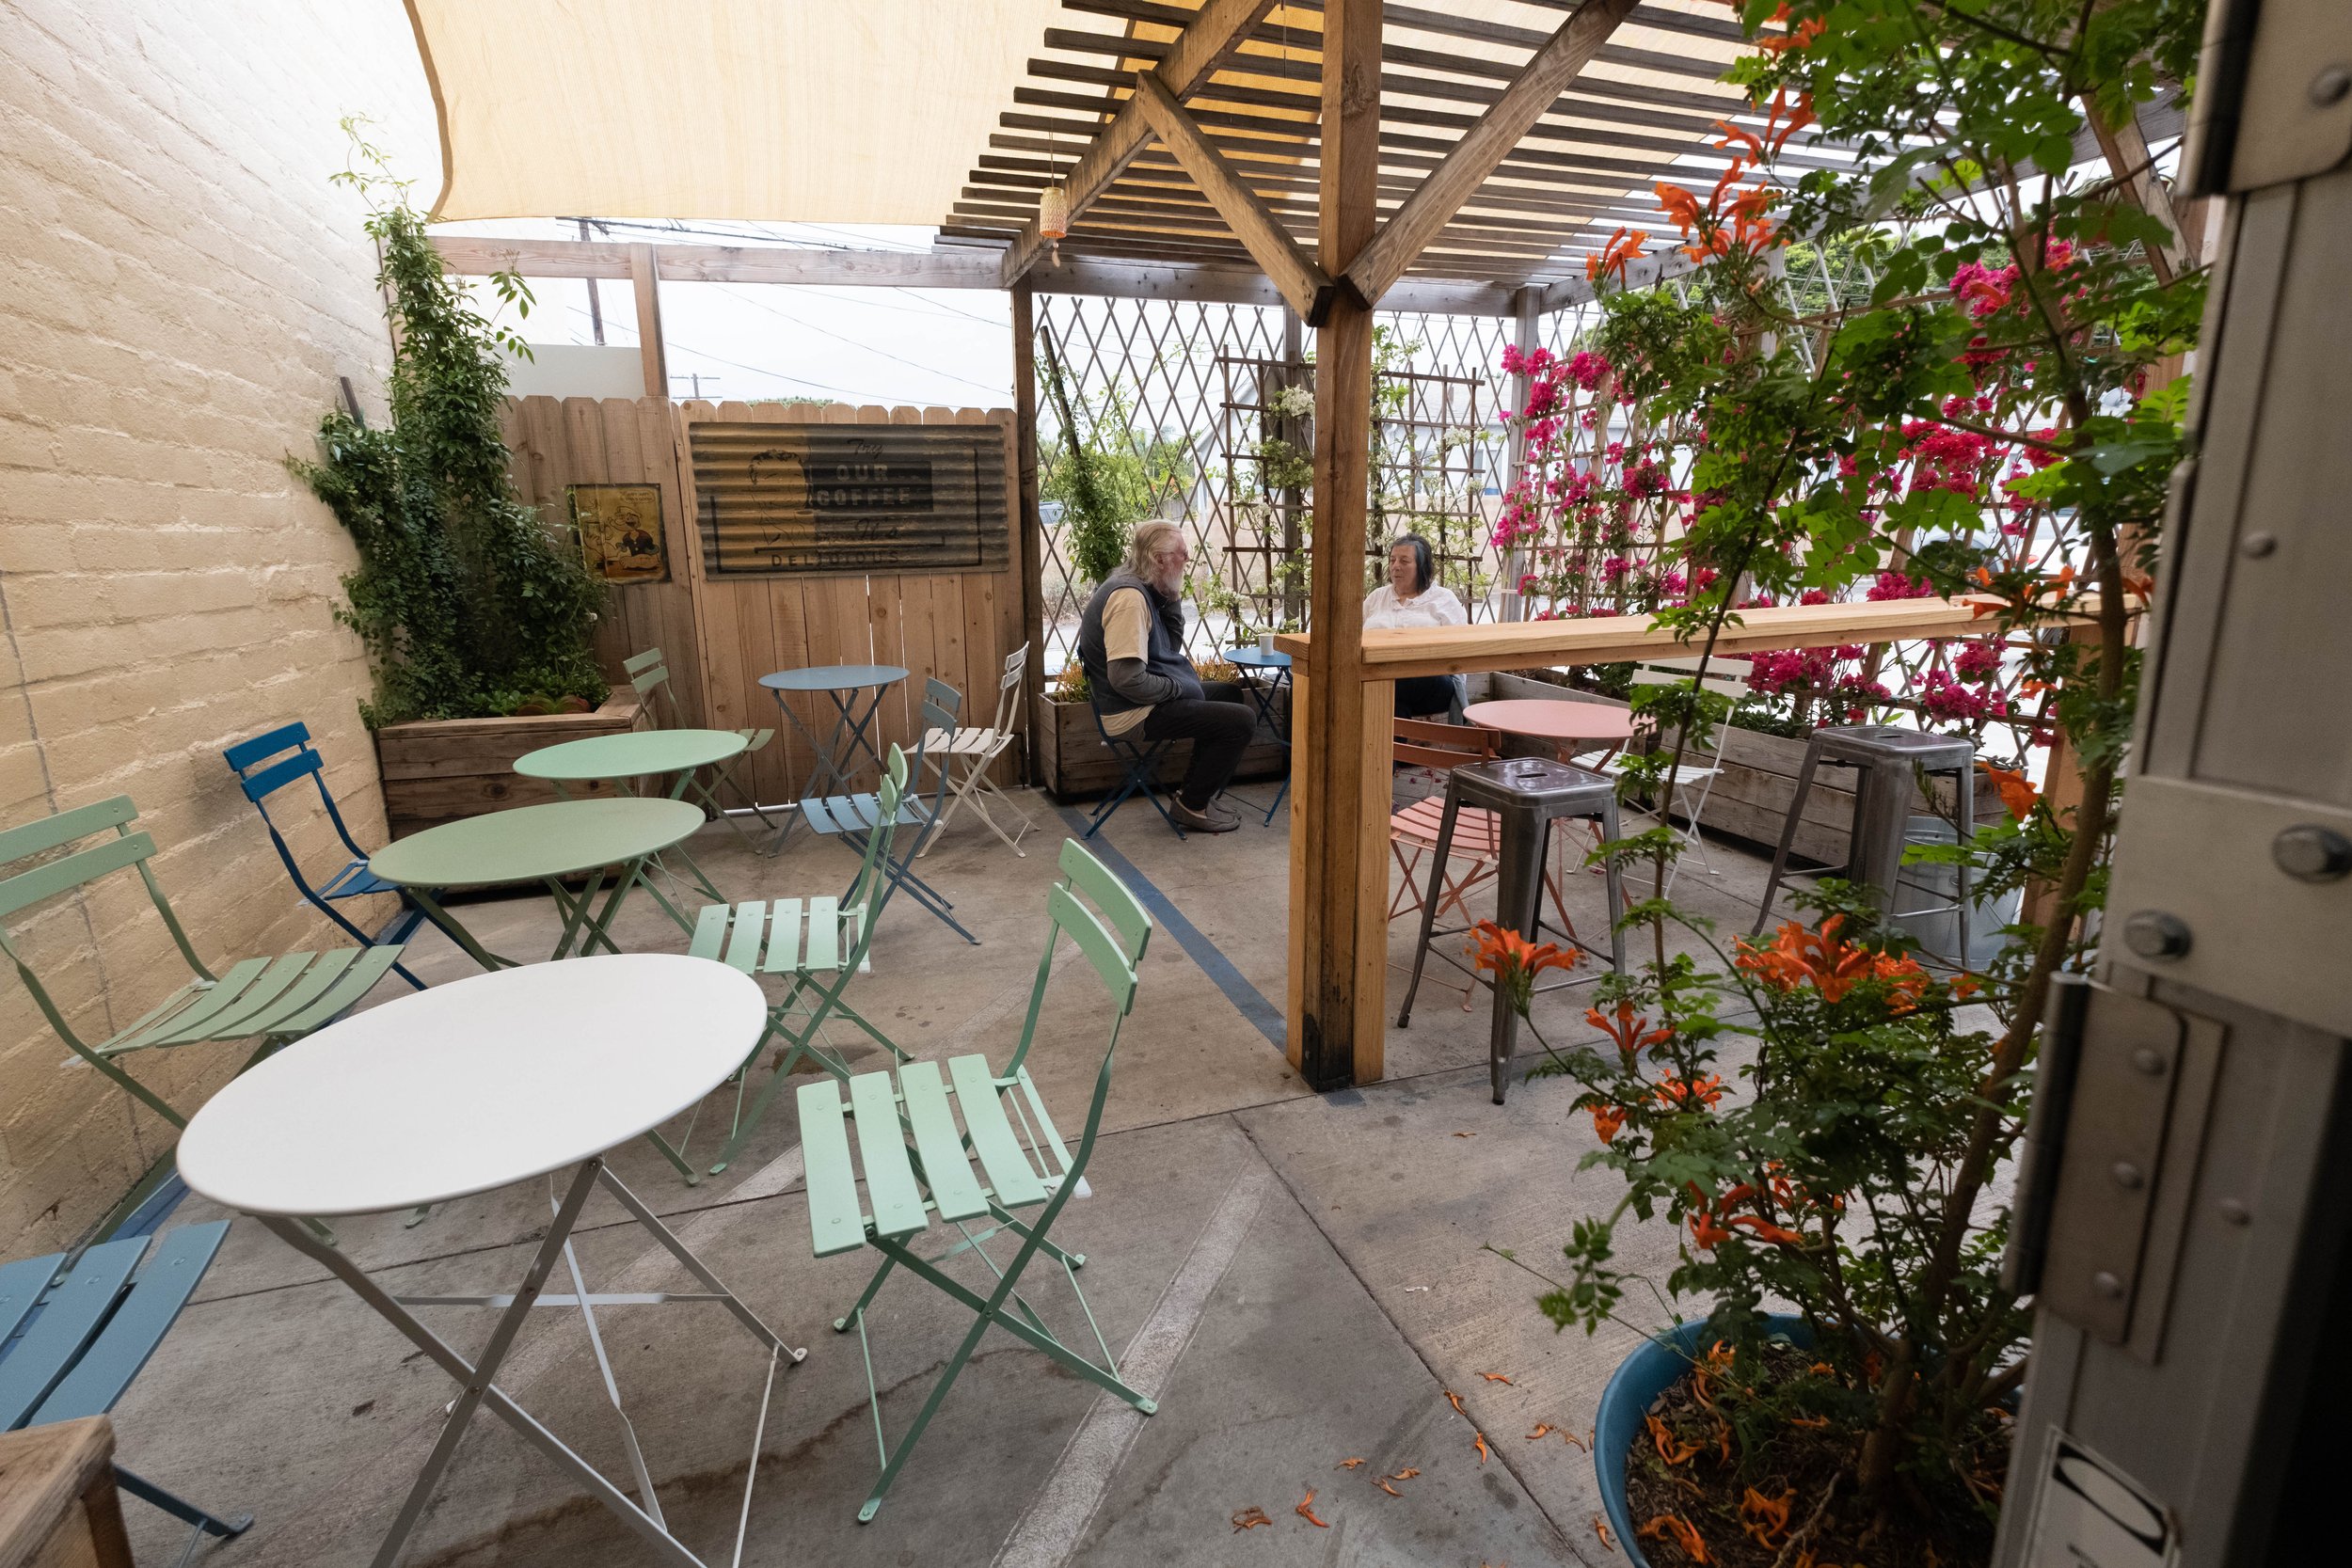  Lo/Cal Coffee & Market is located on Pico just west of Cloverfield in Santa Monica, Calif., and in addition to caffeinated beverages they have pastries, salads and sandwiches, with indoor and outdoor seating. It's open 7:00am to 3:30pm Monday throug